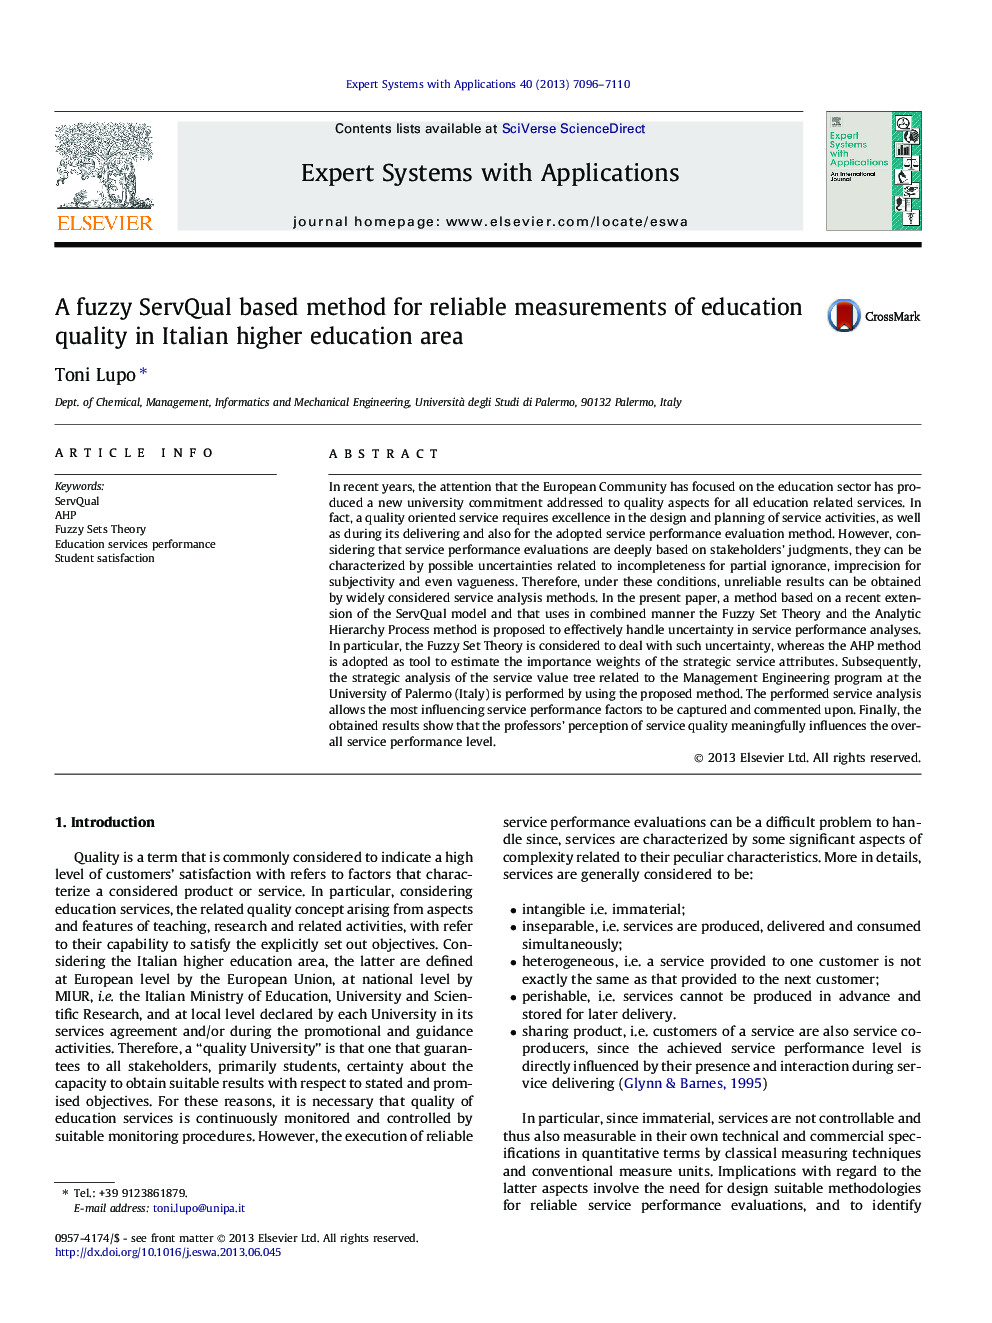 A fuzzy ServQual based method for reliable measurements of education quality in Italian higher education area